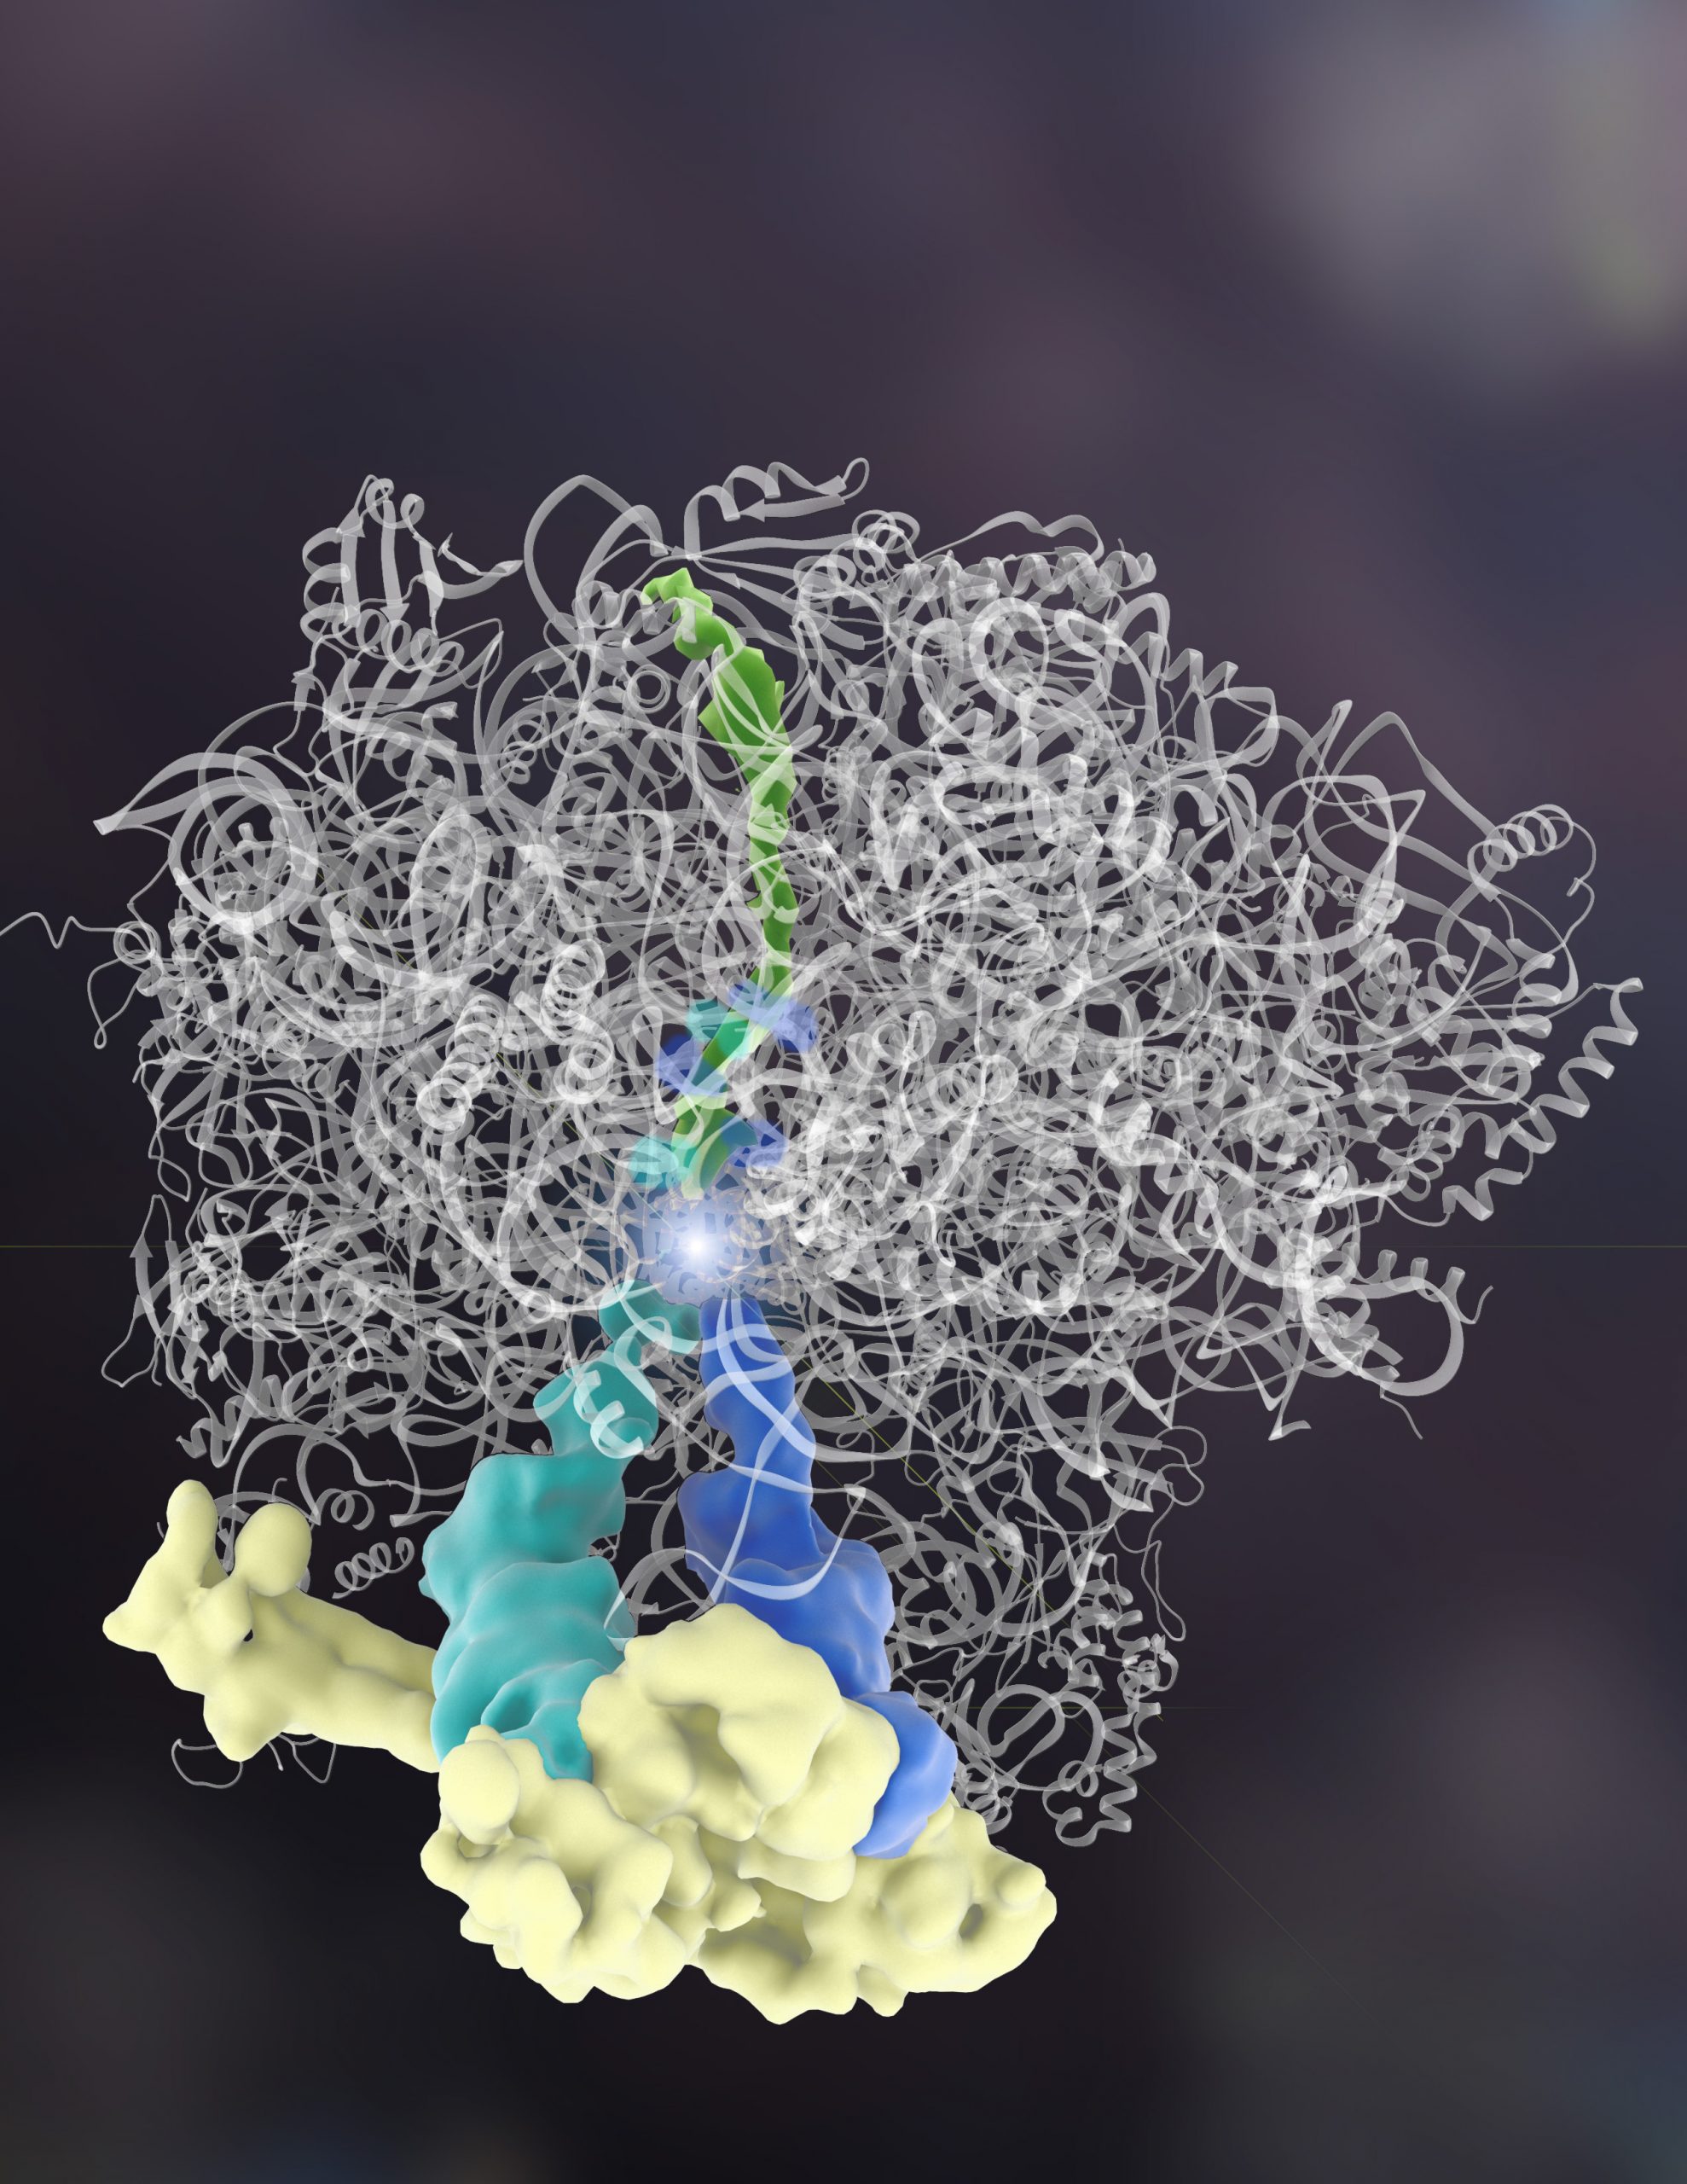 Caught in the act: Rqc2 protein adds amino acids to another protein. The new finding goes against dogma, showing for the first time that the building blocks of a protein, called amino acids, can be assembled by another protein, and without genetic instructions. The Rqc2 protein (yellow) binds tRNAs (dark blue, teal) which add amino acids (bright spot in middle) to a partially made protein (green). The complex binds the ribosome (white).